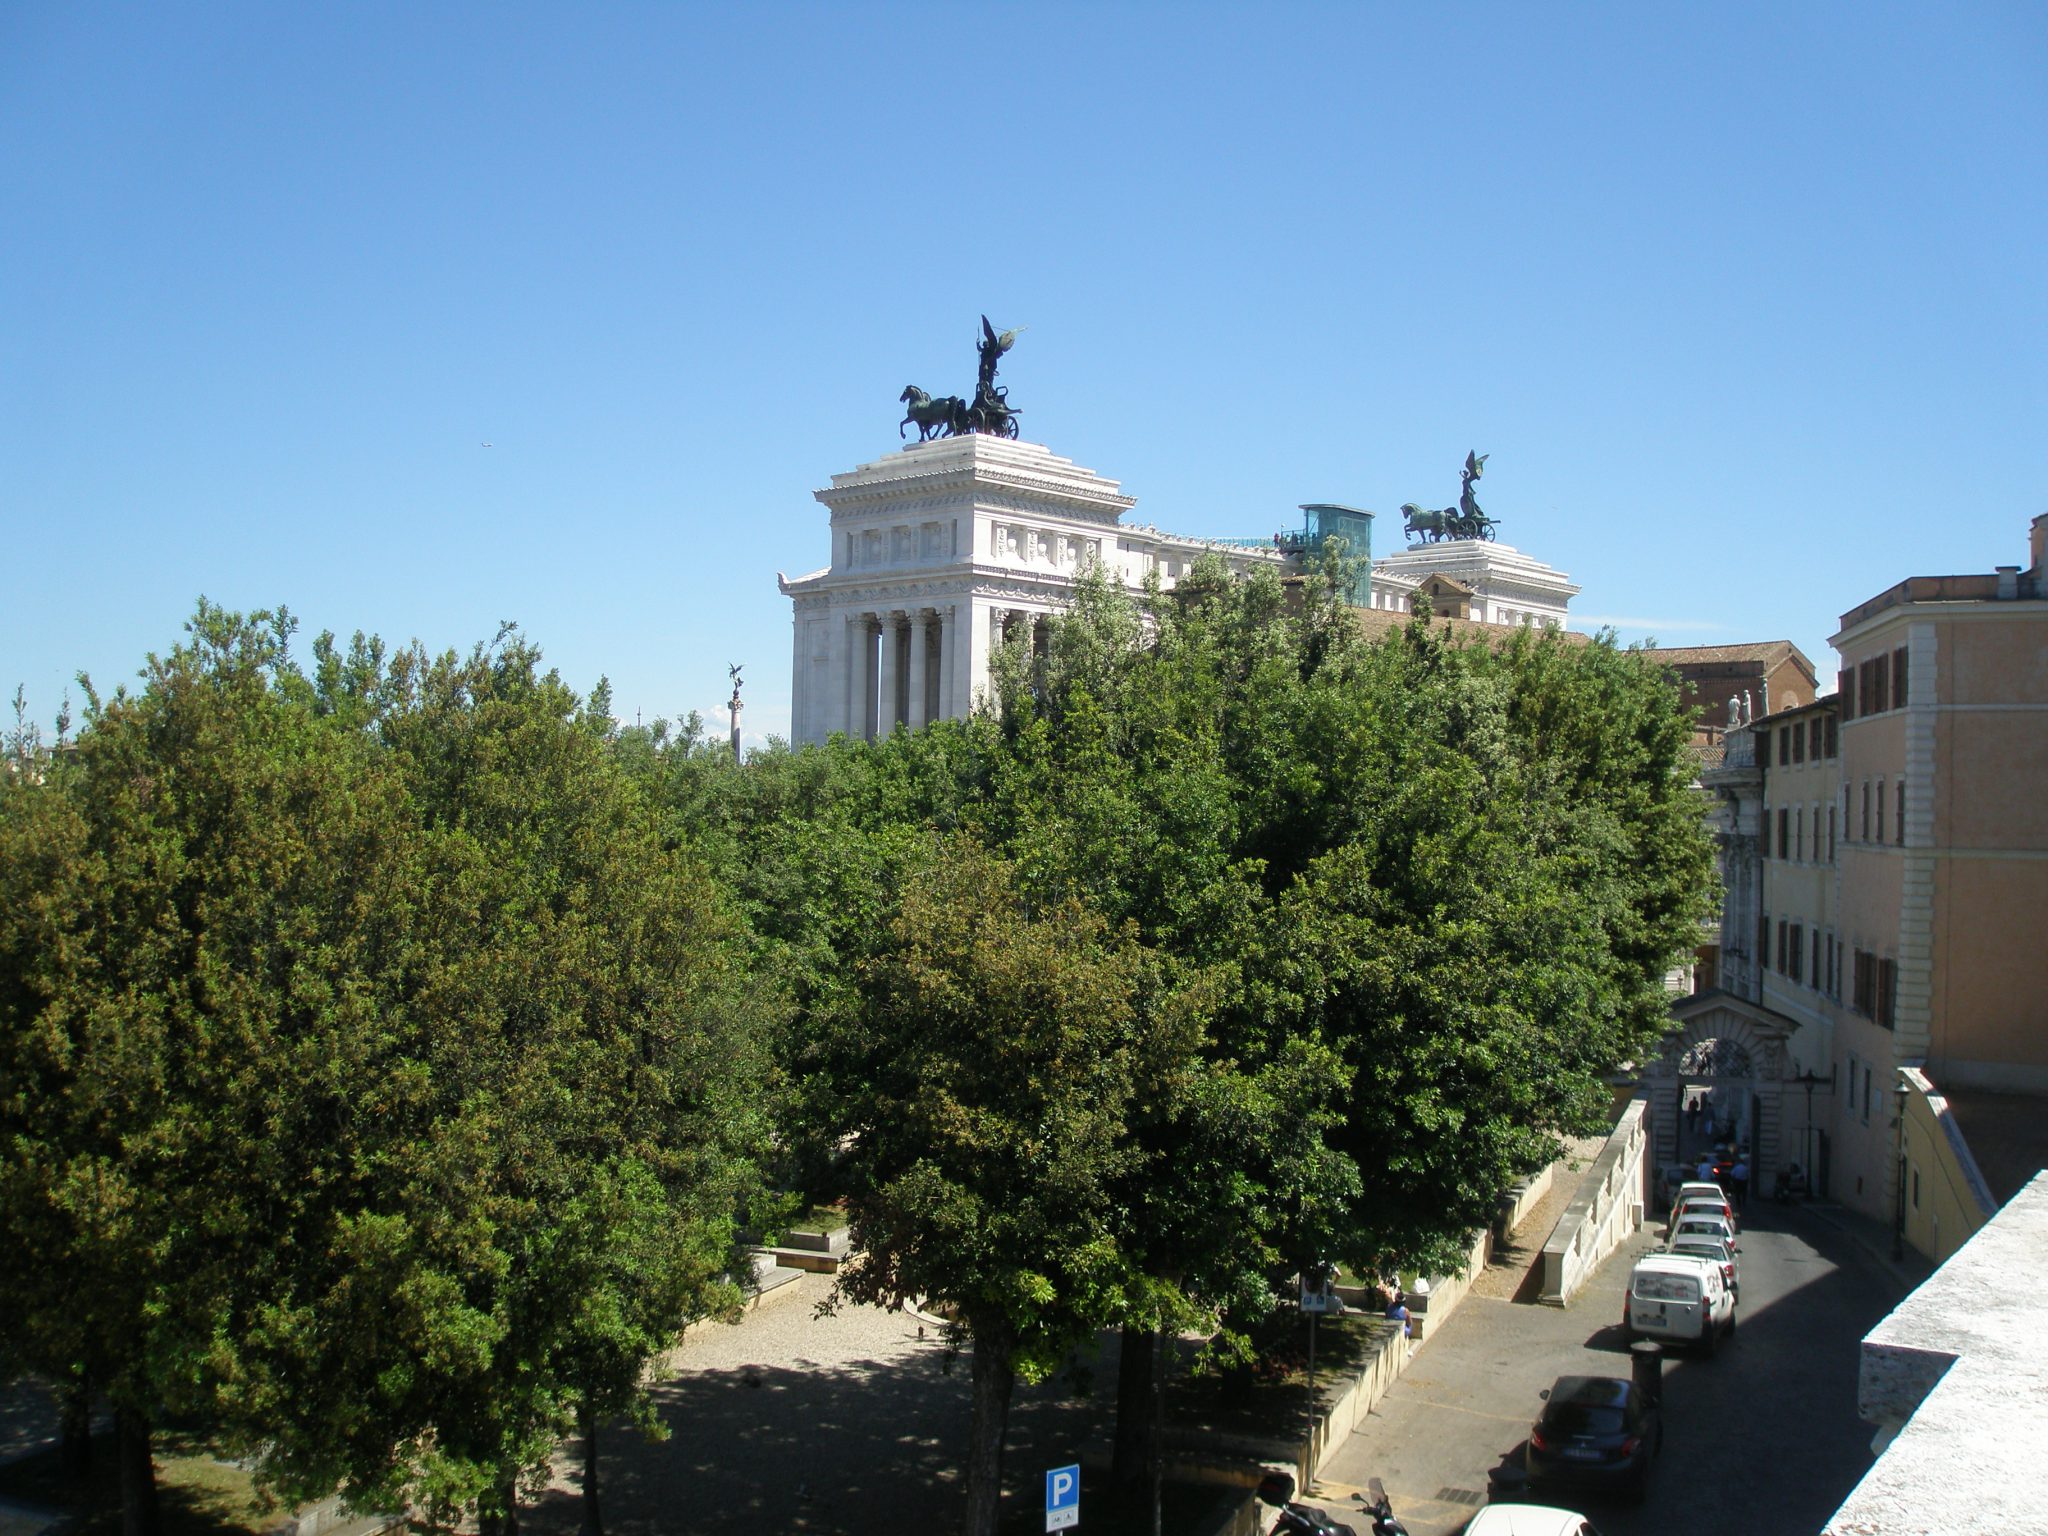 From the roof terrace Cafe at the Capitoline Museum: the view north, toward Il Vittoriano's winged twins.